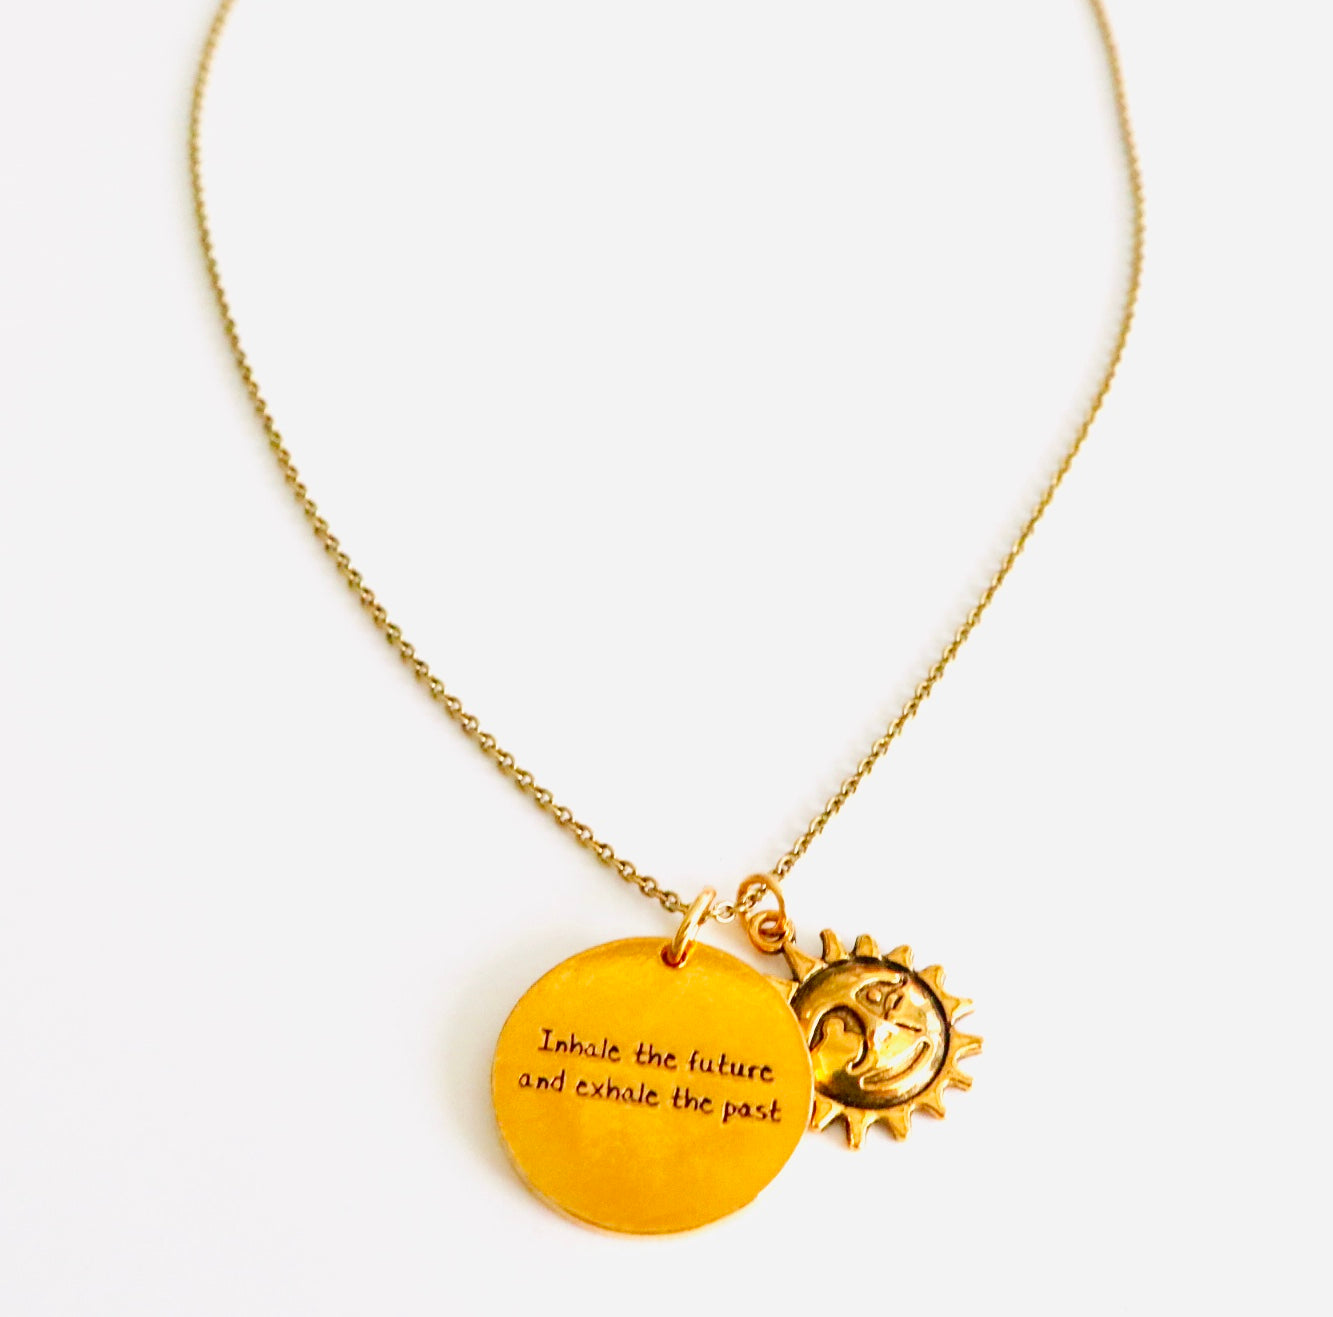 Inhale the future and exhale the past Handstamped Necklace